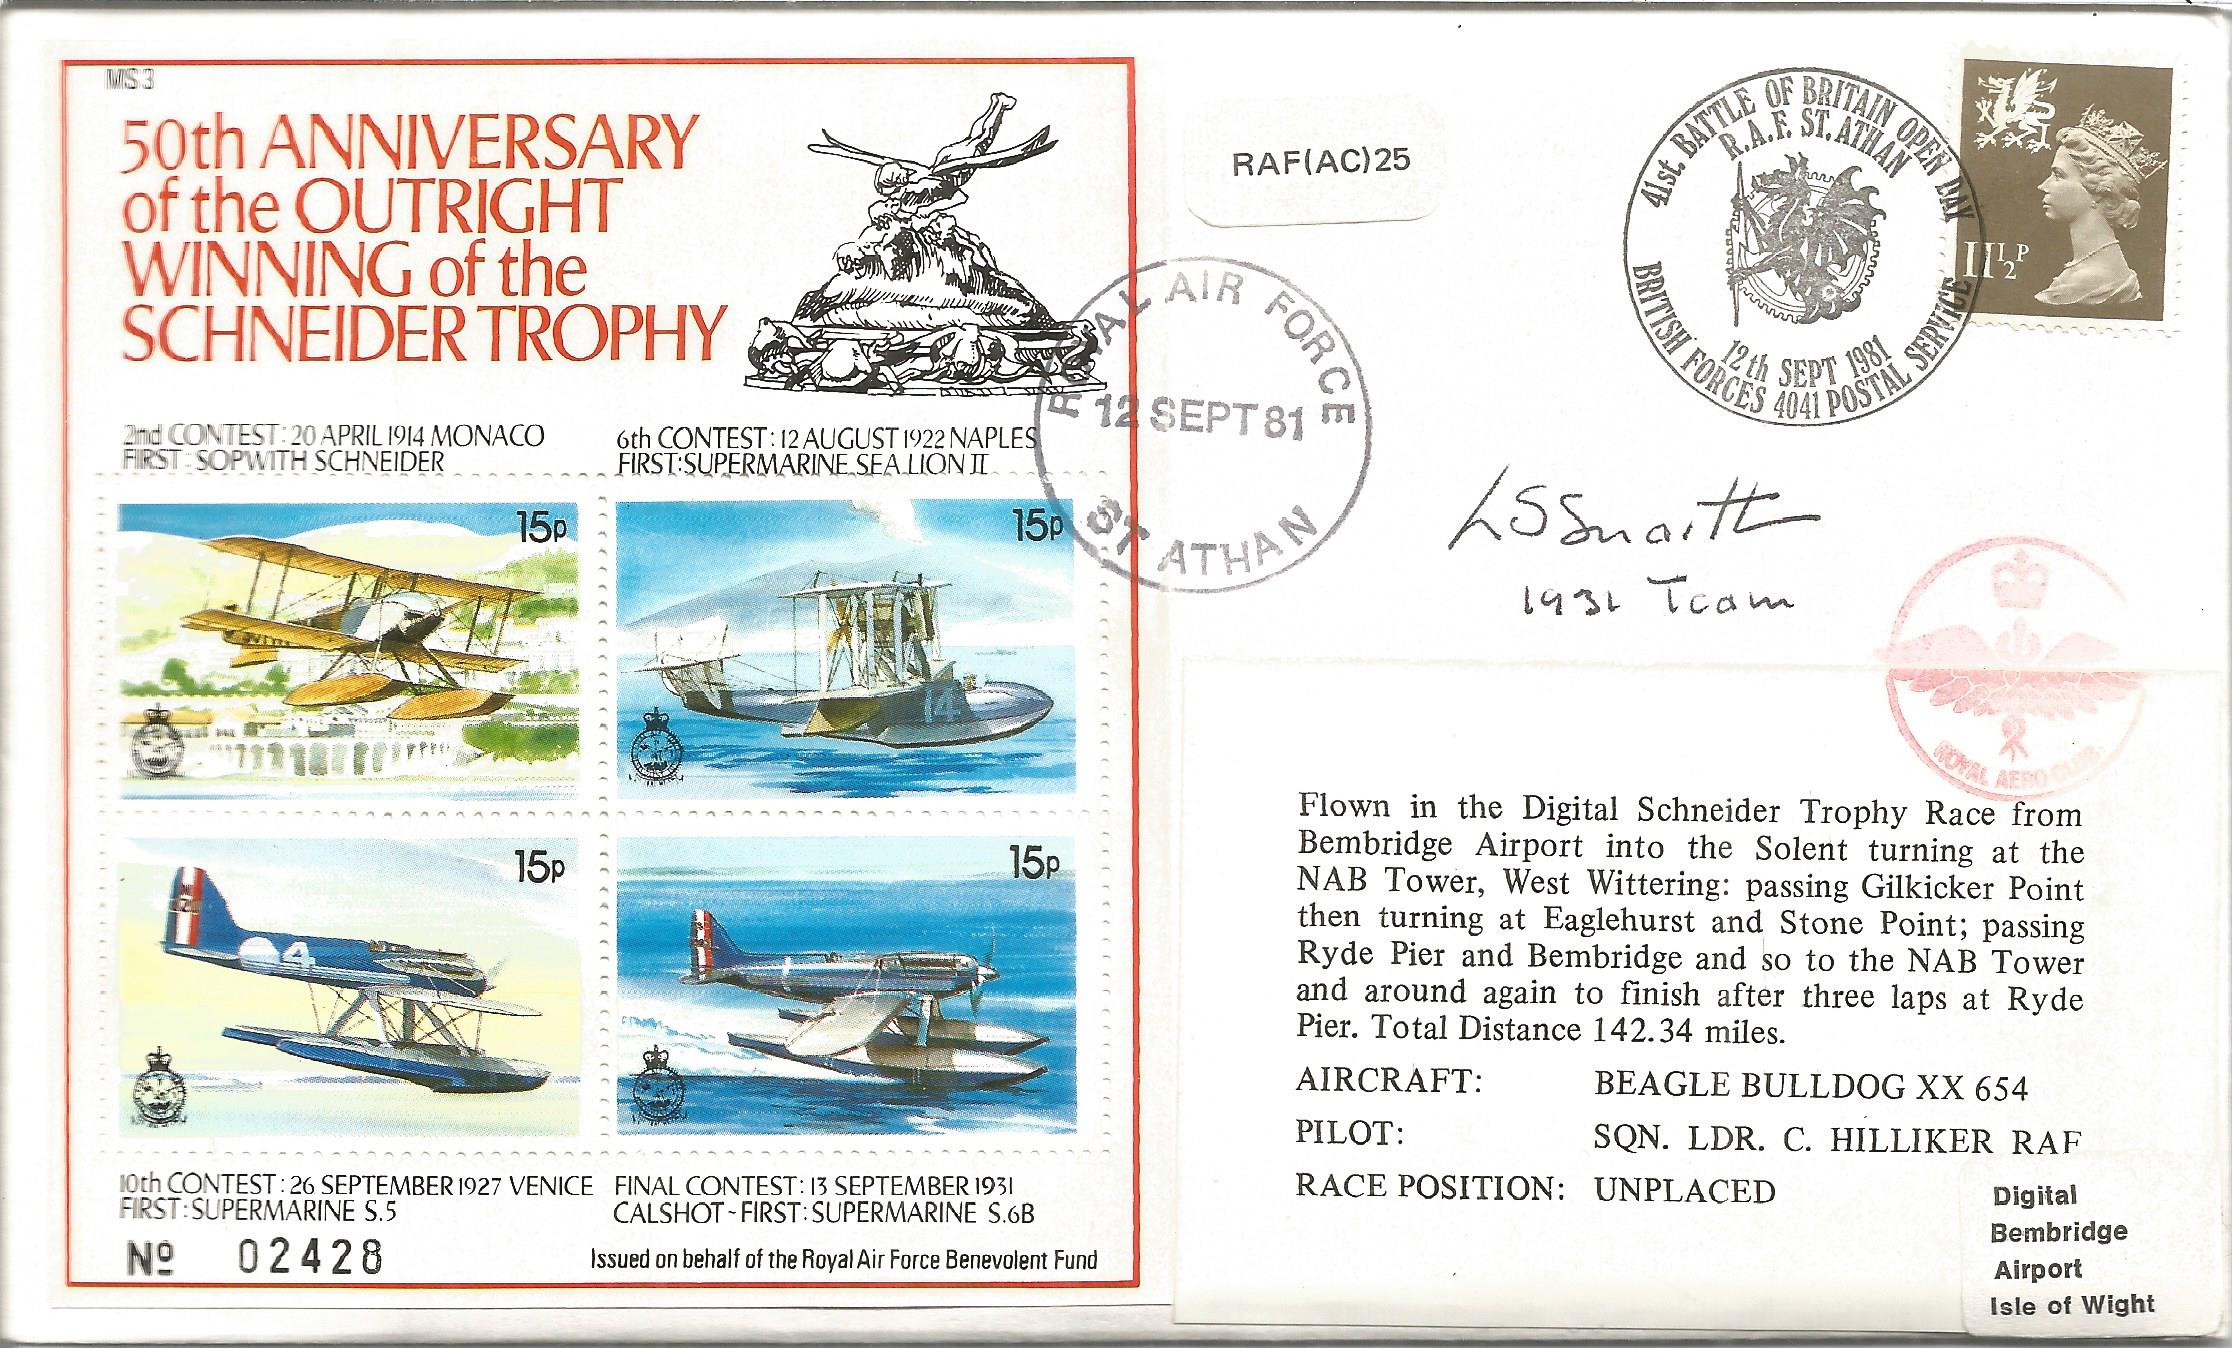 50th Anniversary of the Outright Winning of the Schneider Trophy signed FDC No 206 of 435. Flown